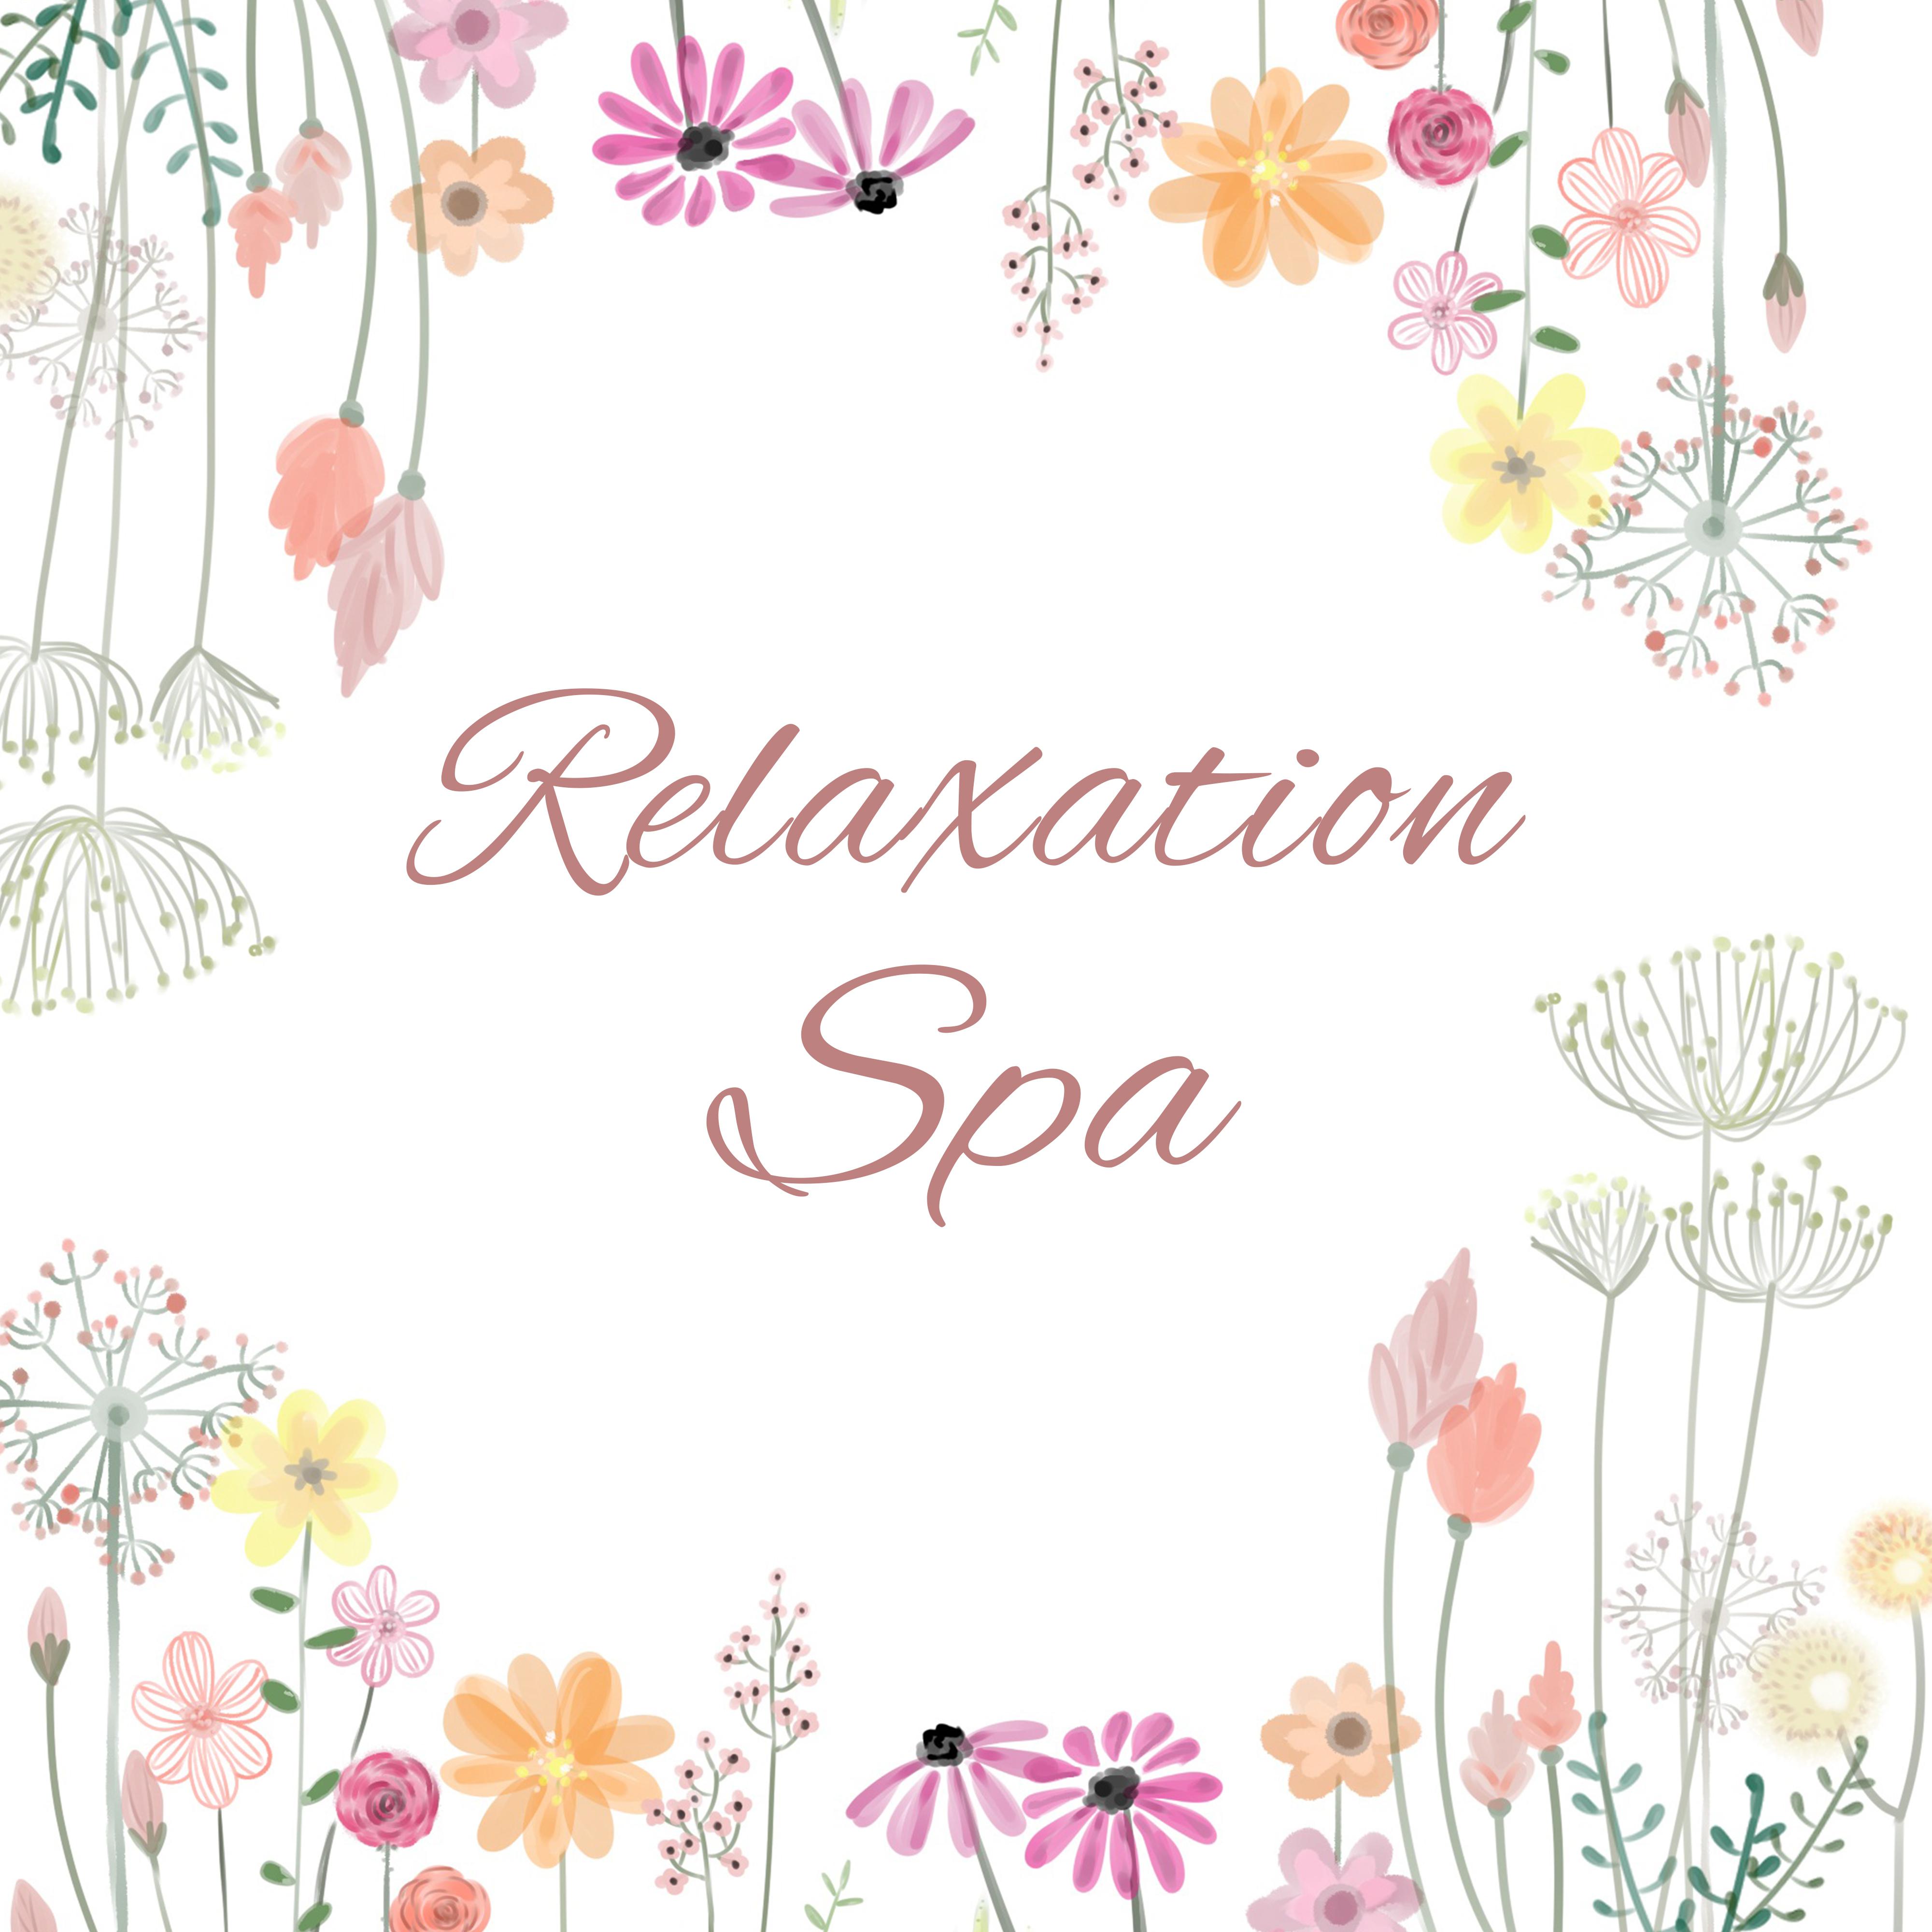 Relaxation Spa – Healing Nature, Peaceful Music for Wellness, Rest, Anti Stress Songs, Soft Nature Sounds for Healing, Pure Massage, Deep Sleep